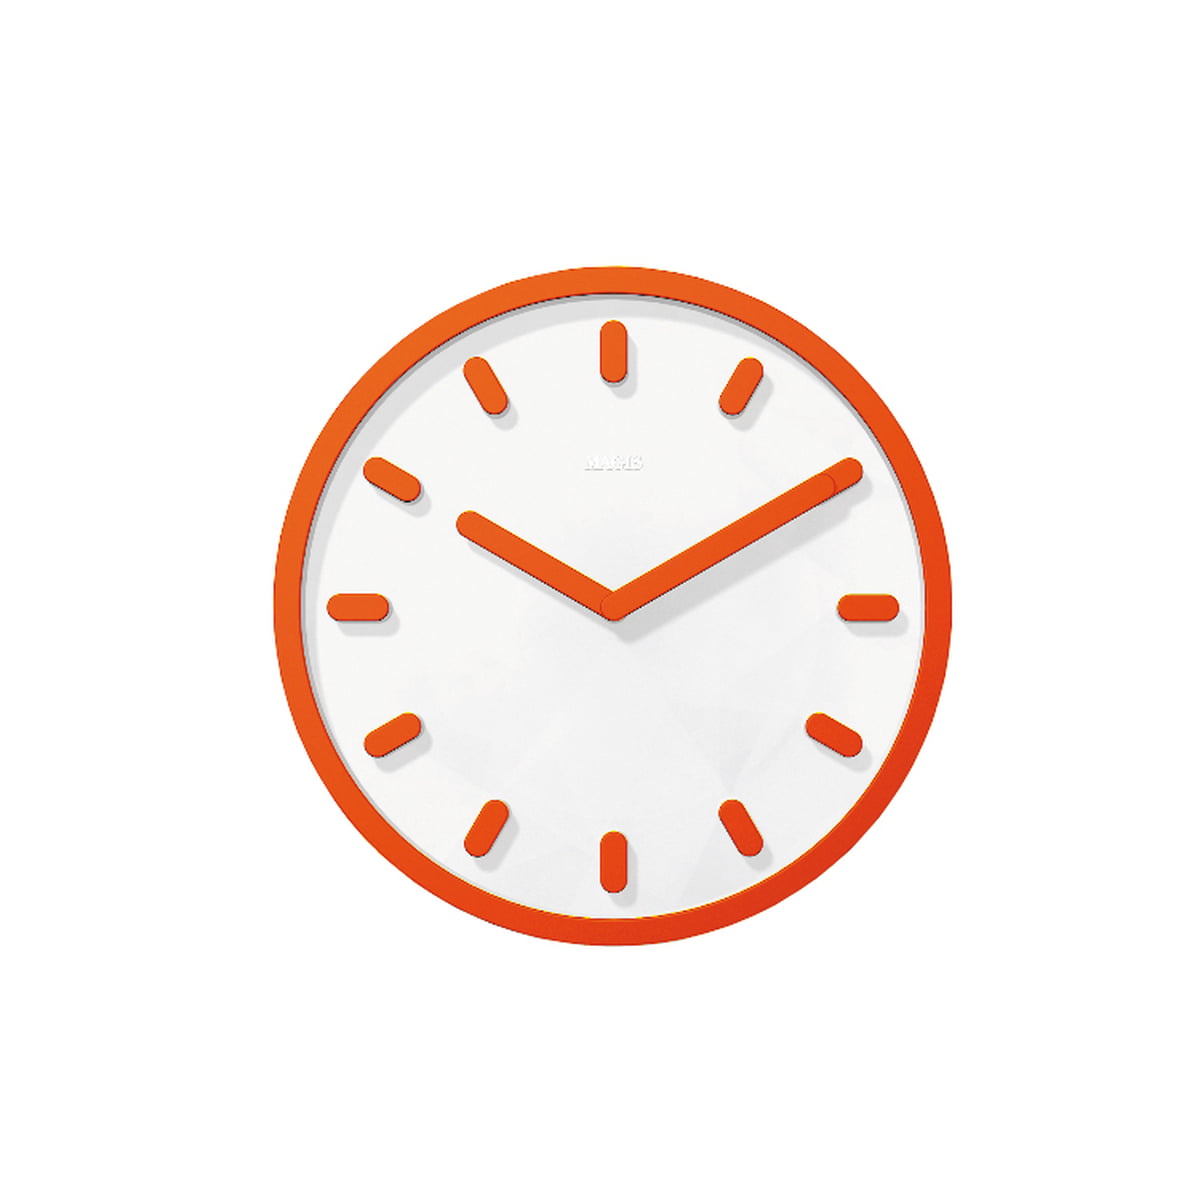 TP Clock - Official app in the Microsoft Store